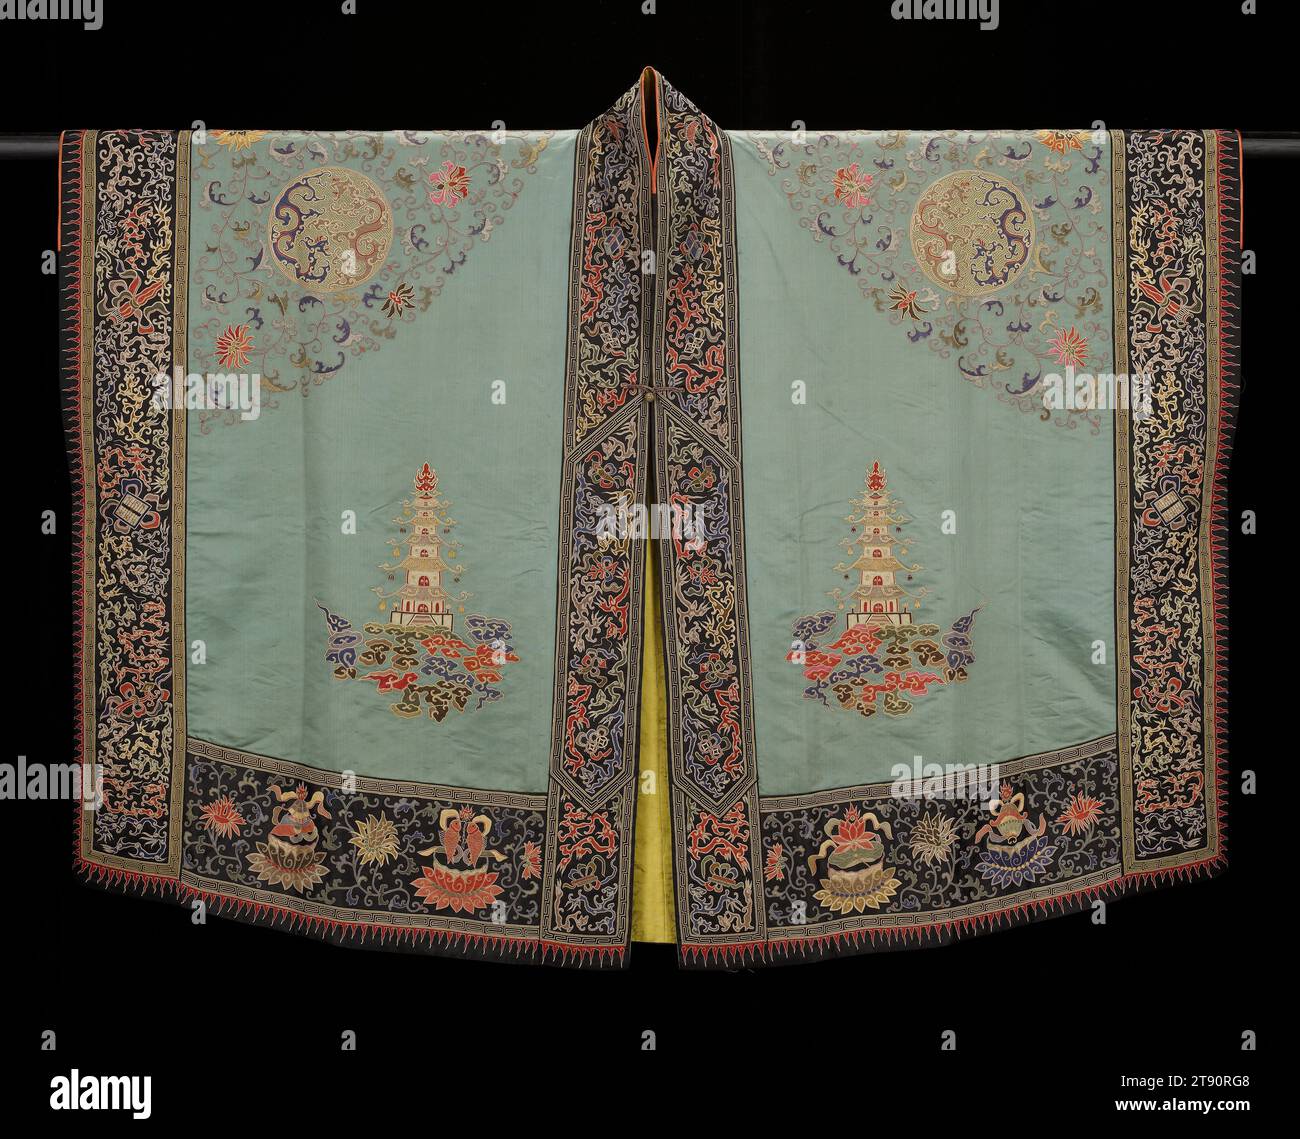 Daoist priest’s robe (jiangyi), 1662-1722, L.57-1/4 in., Embroidered satin, China, 17th-18th century, The most notable feature of many Daoist robes is the 'cosmic diagram' on the upper back. This usually square composition contains various celestial symbols. Within a circle at its center, a pagoda surrounded by sunrays represents paradise, with clouds and stars. The colored disks outside the circle are stars, and three heavenly gates appear between the sun and moon along the square’s top edge. The scheme represents cosmic harmony and reflects Daoism’s focus on cosmology Stock Photo